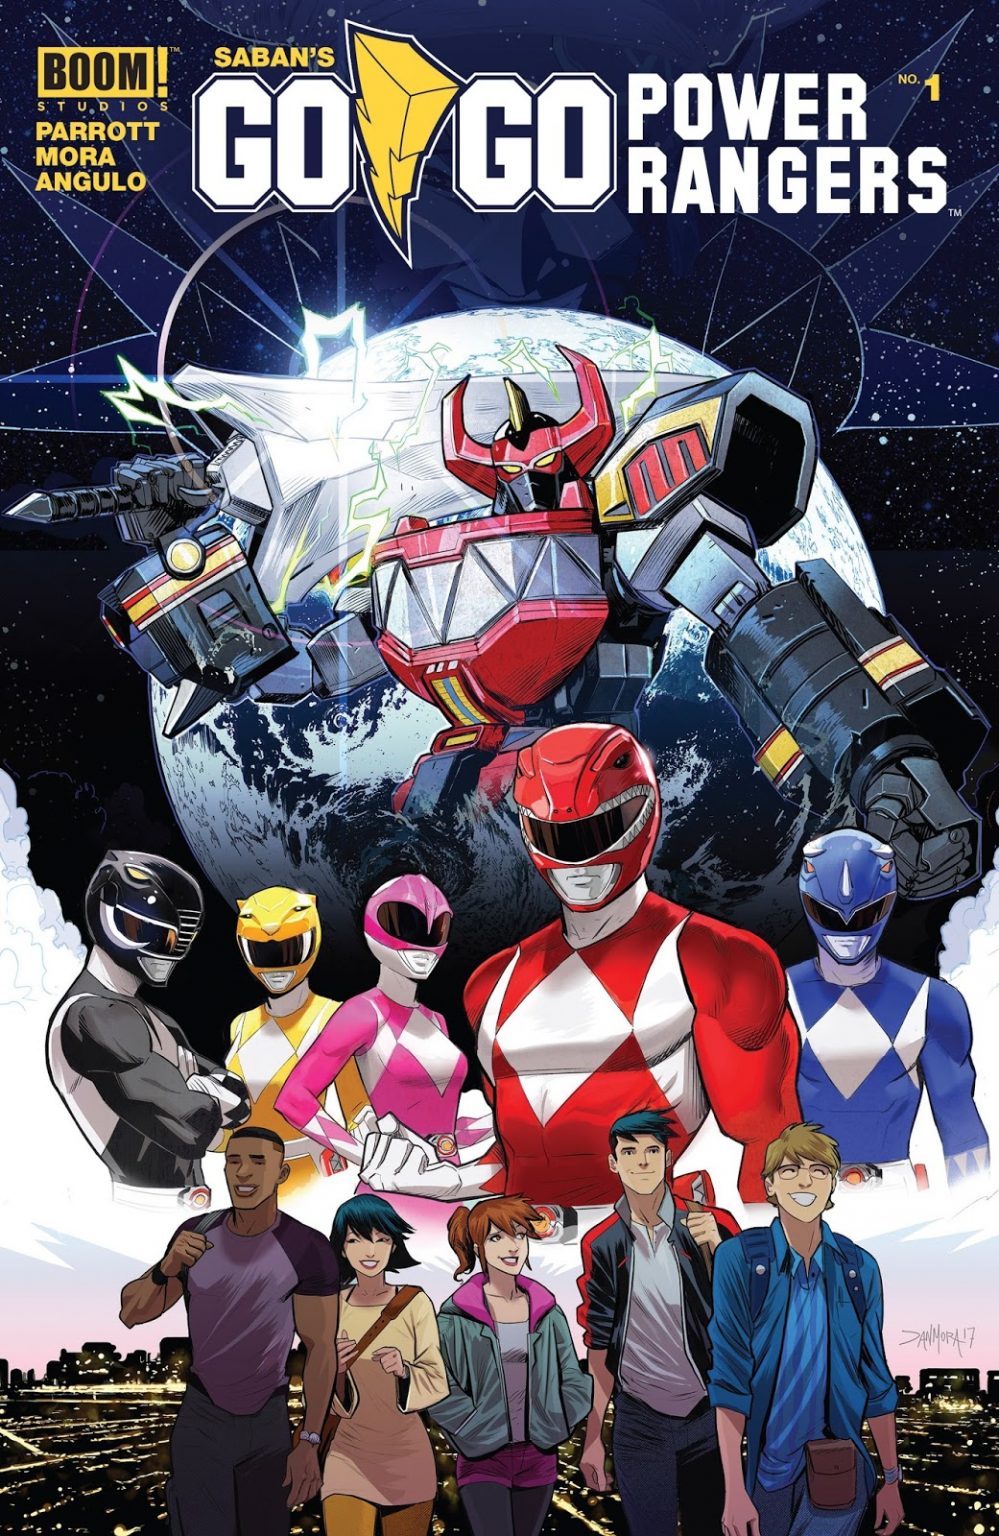 Hasbro To Launch Power Rangers Universe Across Both Film and TV